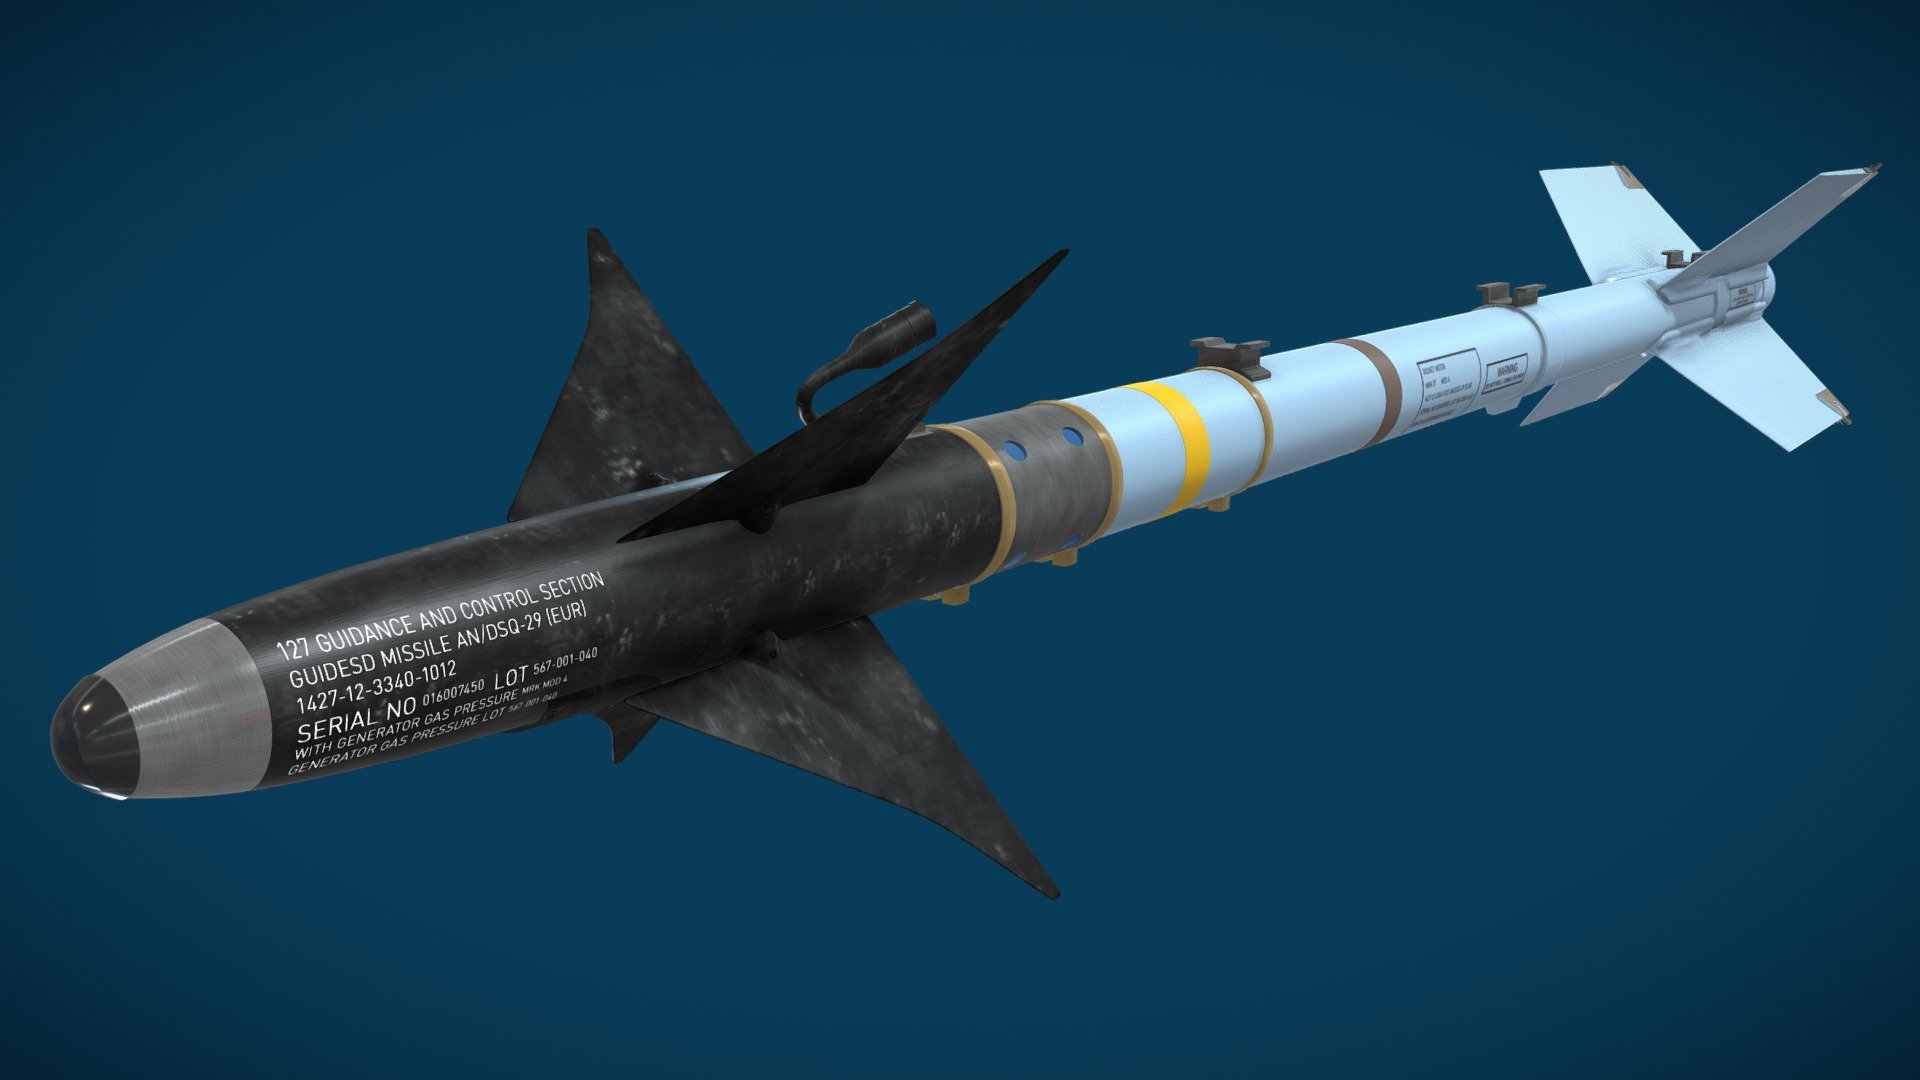 A medium detail AIM-9L sidewinder air-to-air missile with annotations.

This missile was developed by the USAF and U.S. Navy. 3D model created using reference images found on the internet and various 3D sites.

Published by 3ds Max - AIM-9L Sidewinder Missile - Buy Royalty Free 3D model by Kanedog (@Kane33) 3d model